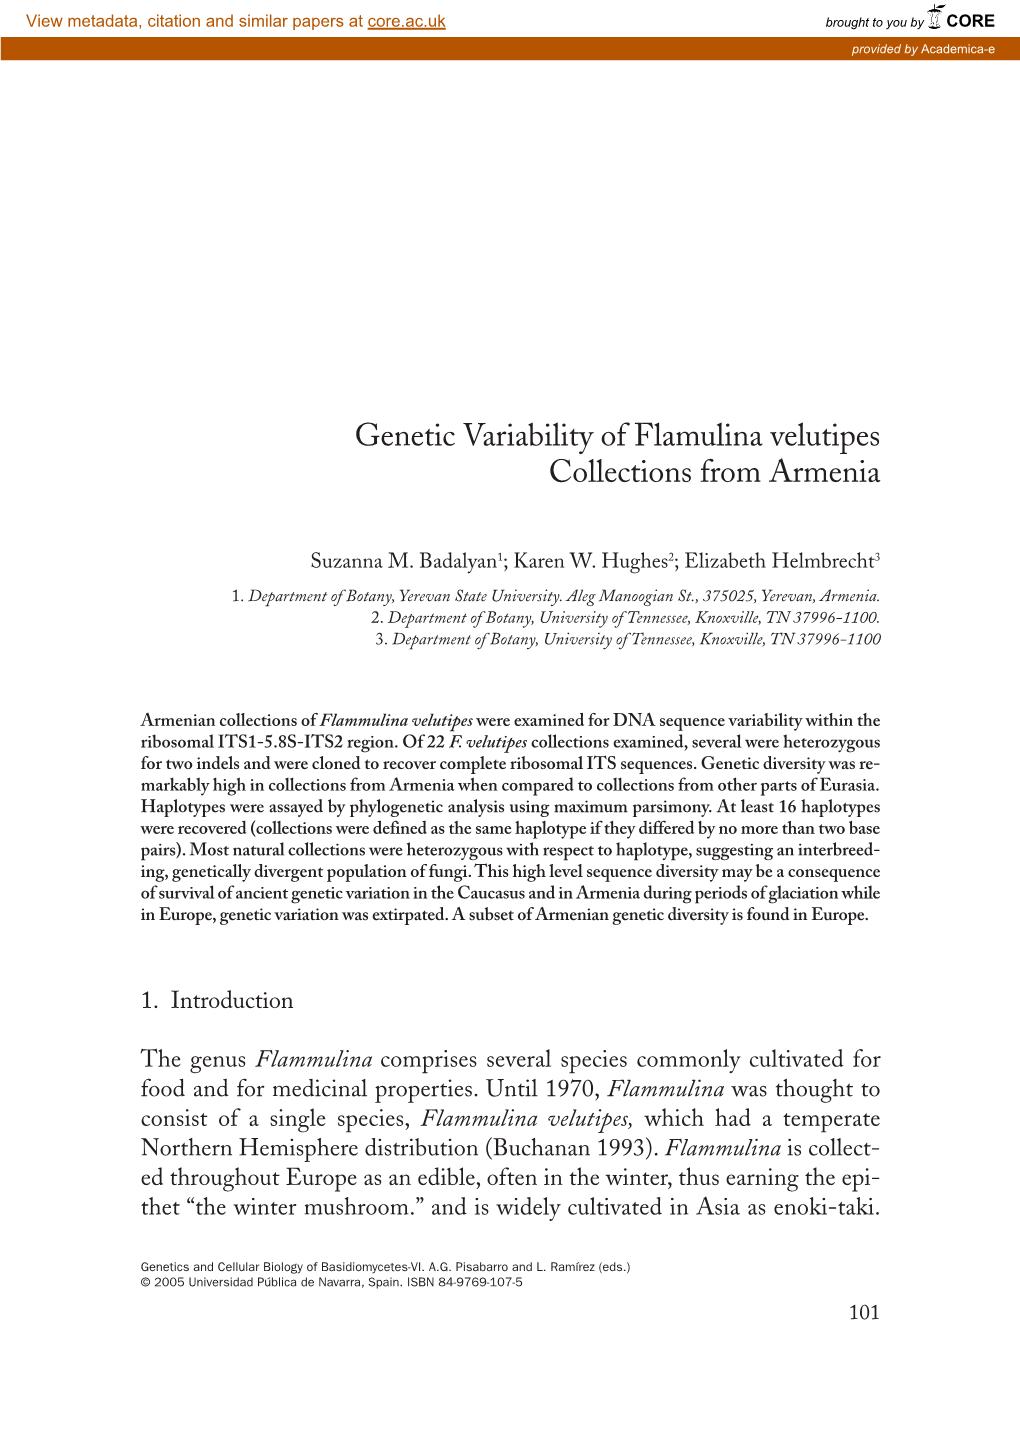 Genetic Variability of Flamulina Velutipes Collections from Armenia